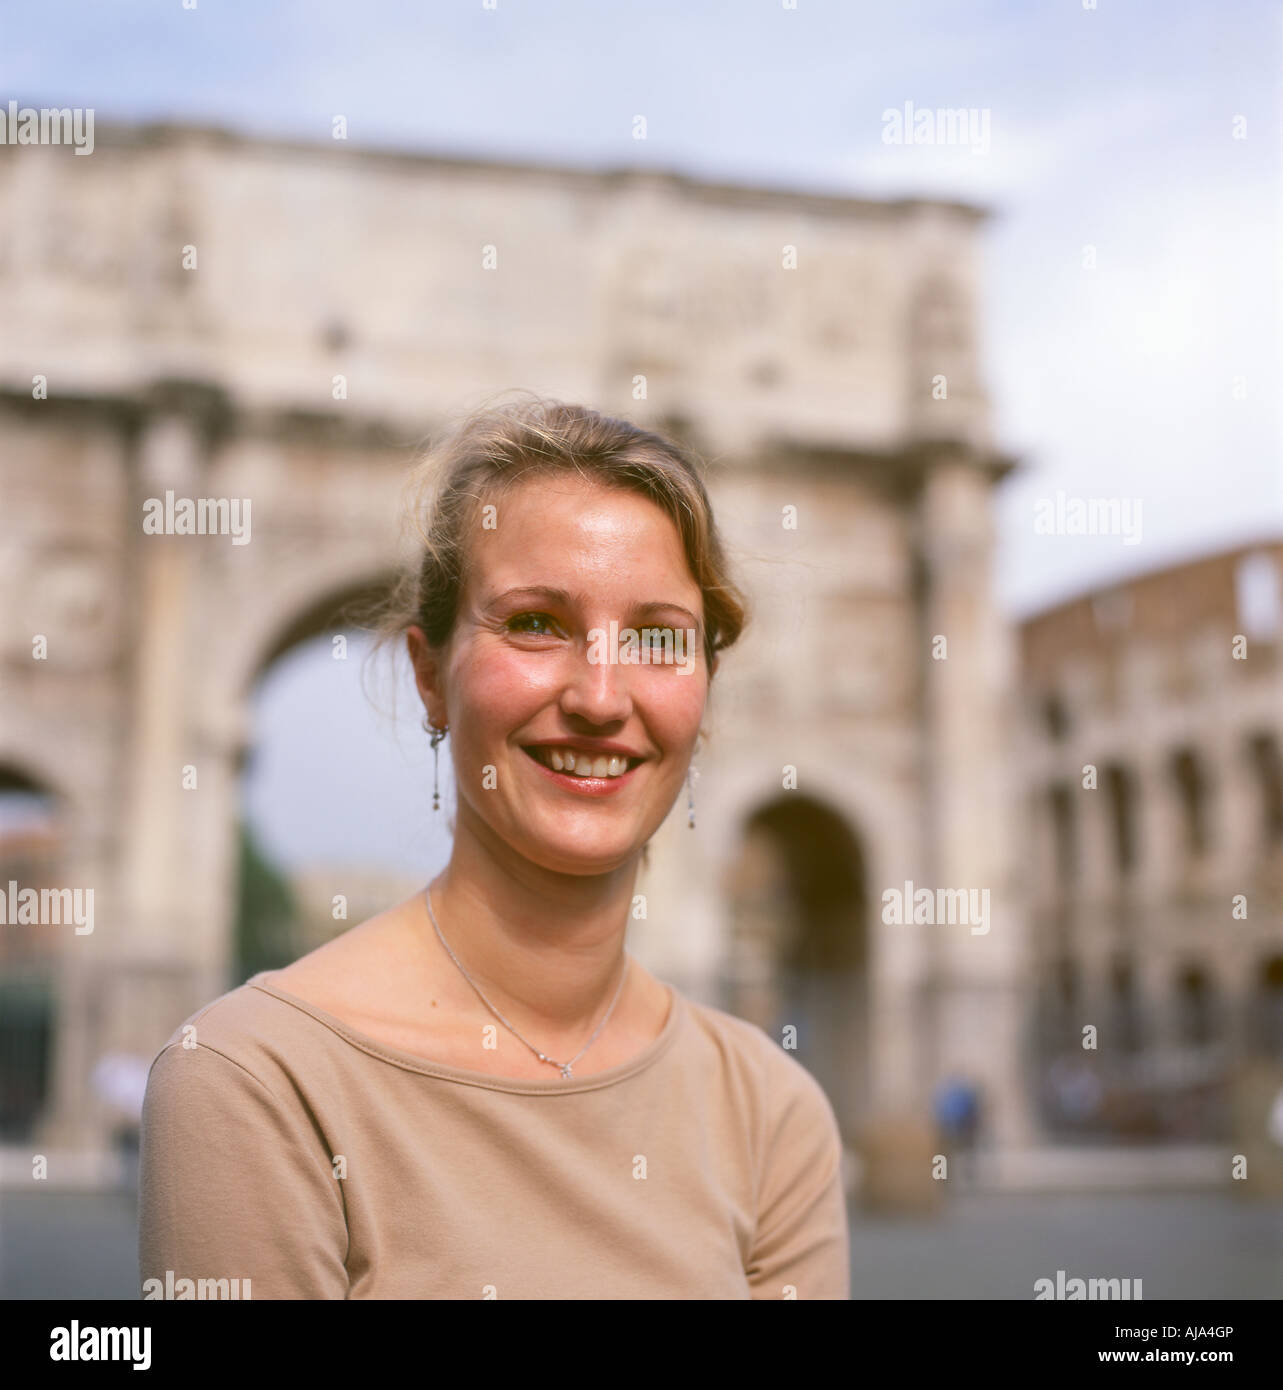 A beautiful Dutch woman tourist visitor smiling visiting the ancient city sites posing near the Colosseum in Rome Italy Europe EU  KATHY DEWITT Stock Photo